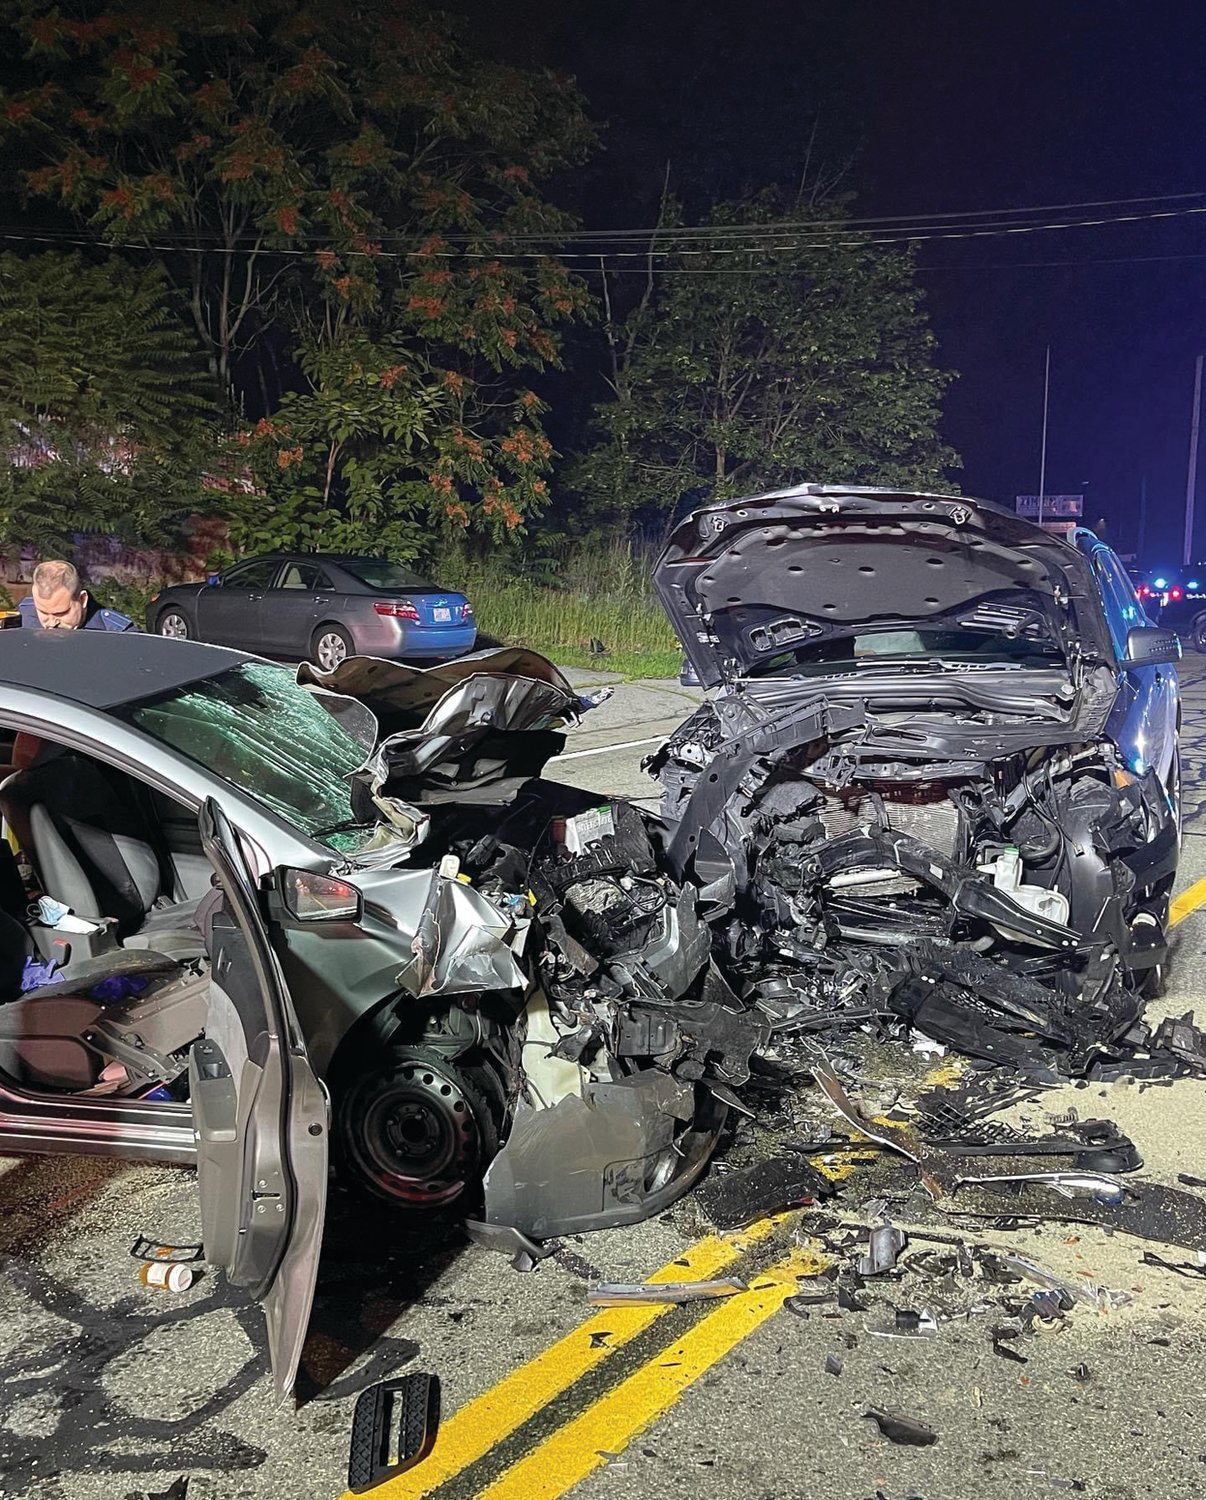 THE AFTERMATH: This image provided by Cranston Police shows the aftermath of a fatal head-on collision that occurred the night of July 8 on Atwood Avenue.